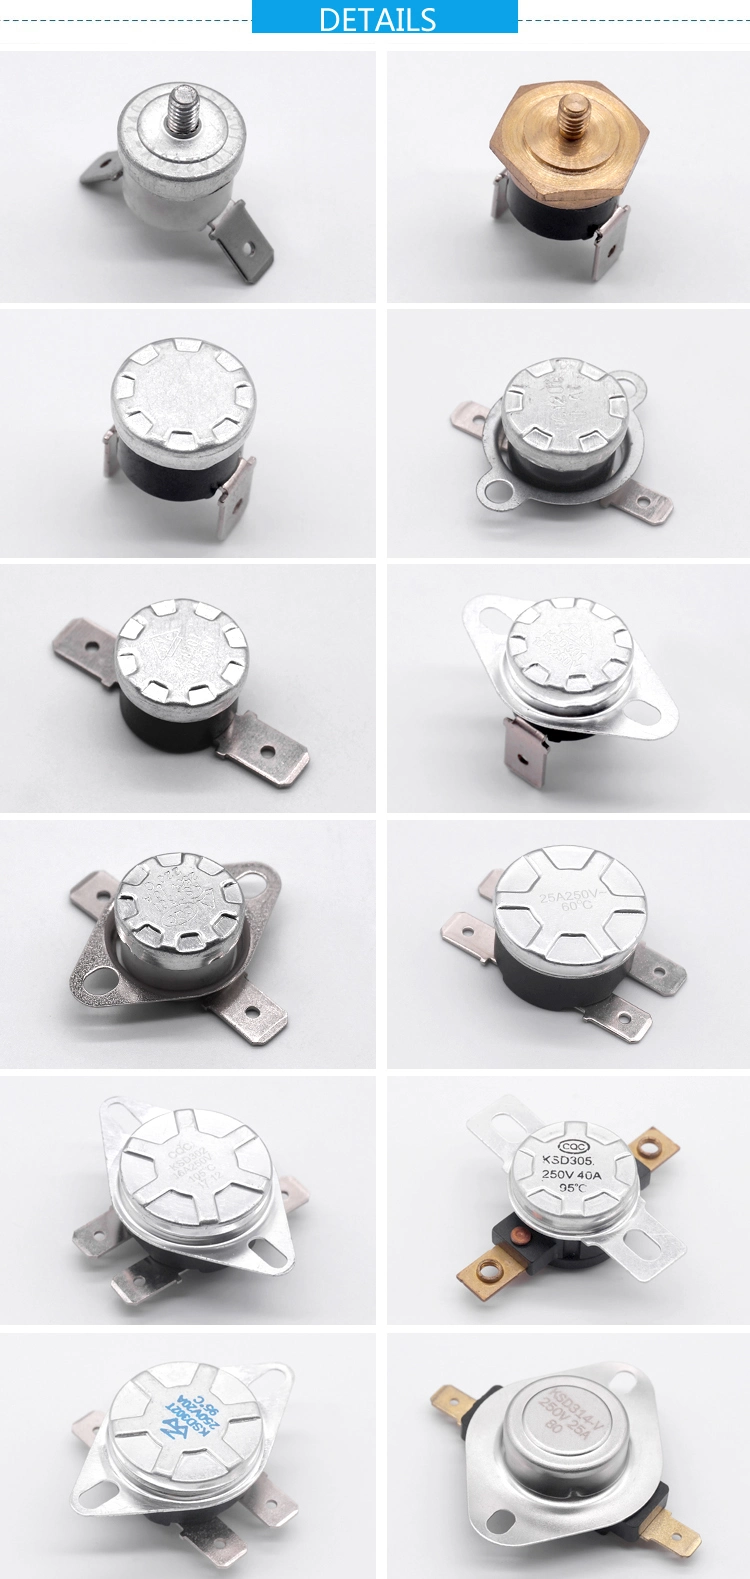 Closed Switch Thermal Fuse Switch Thermostat Switch for Mocrowave Oven